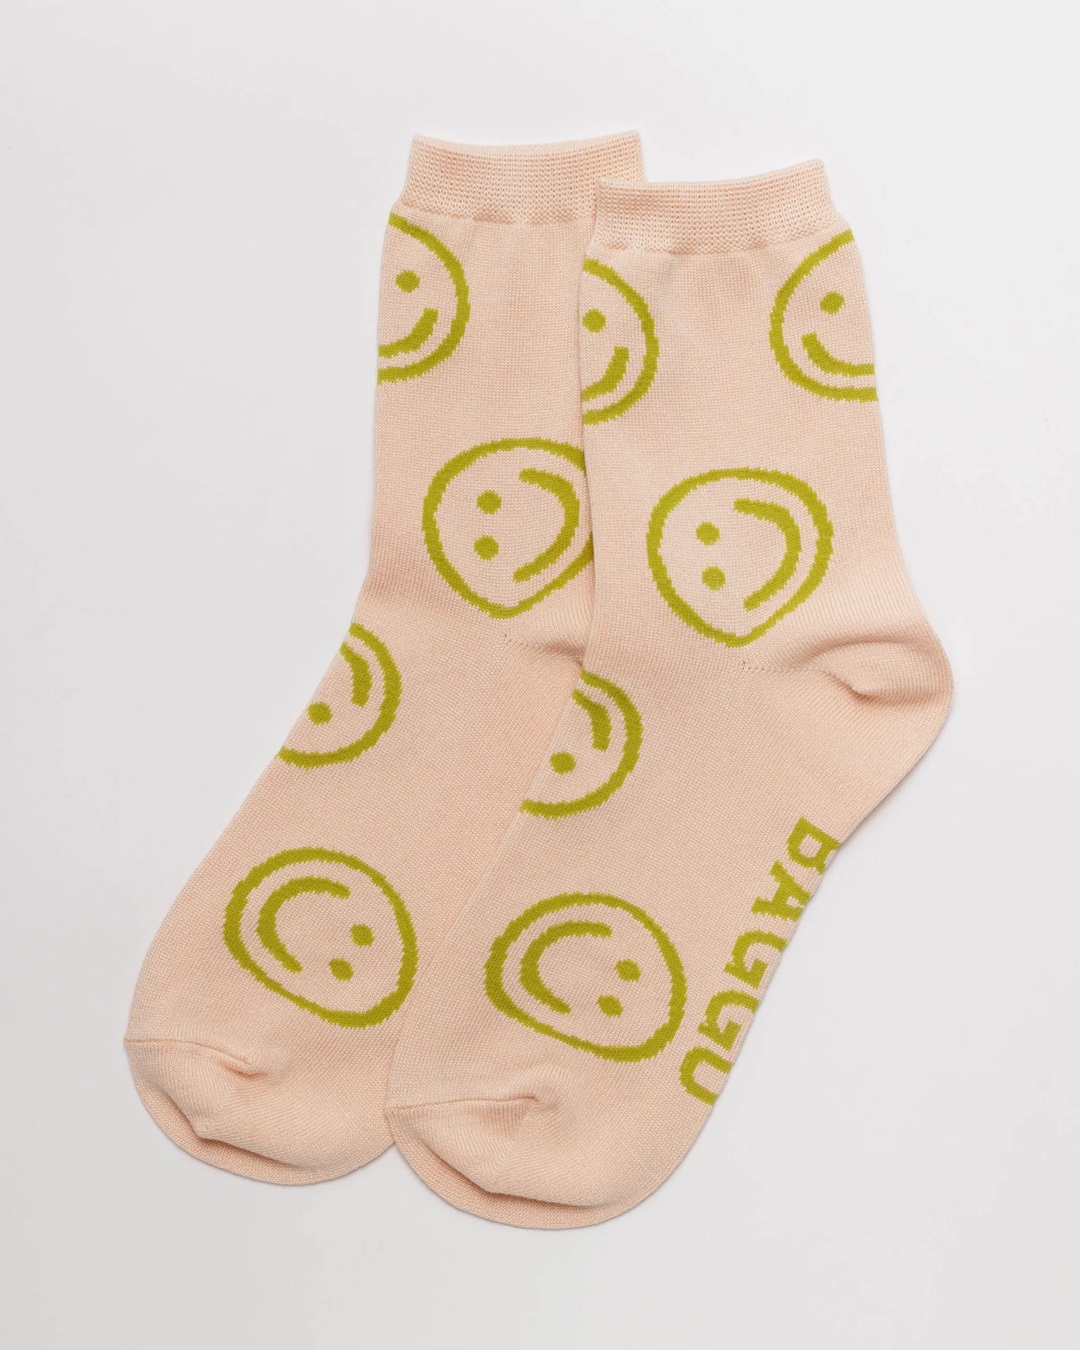 Light pink with green smiley faces pair of socks